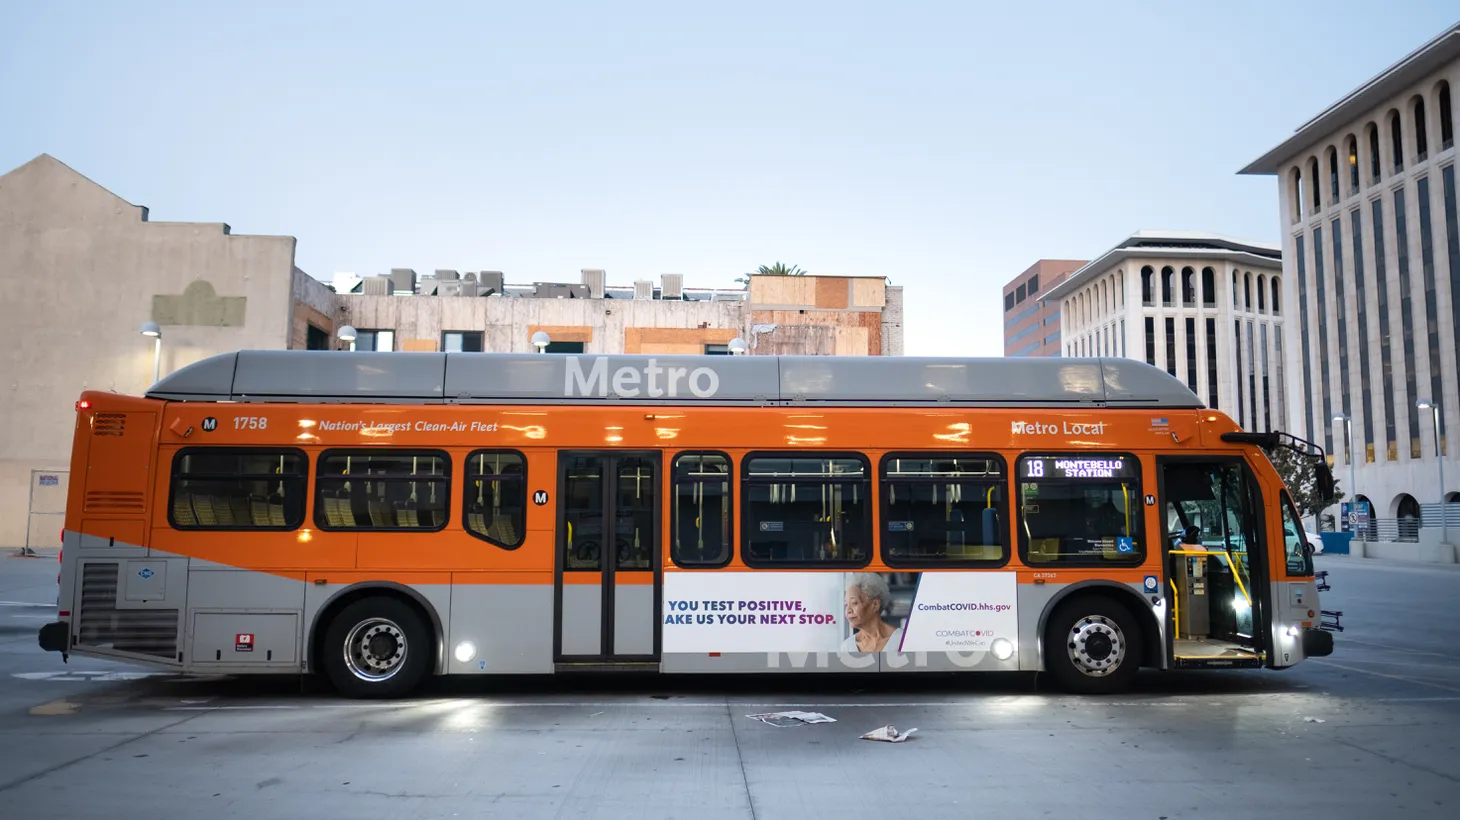 Bus and train fares make up about 15-20% of Metro’s annual operating funds. Public transit advocates want Metro to find that money elsewhere and make public transit free for all riders.